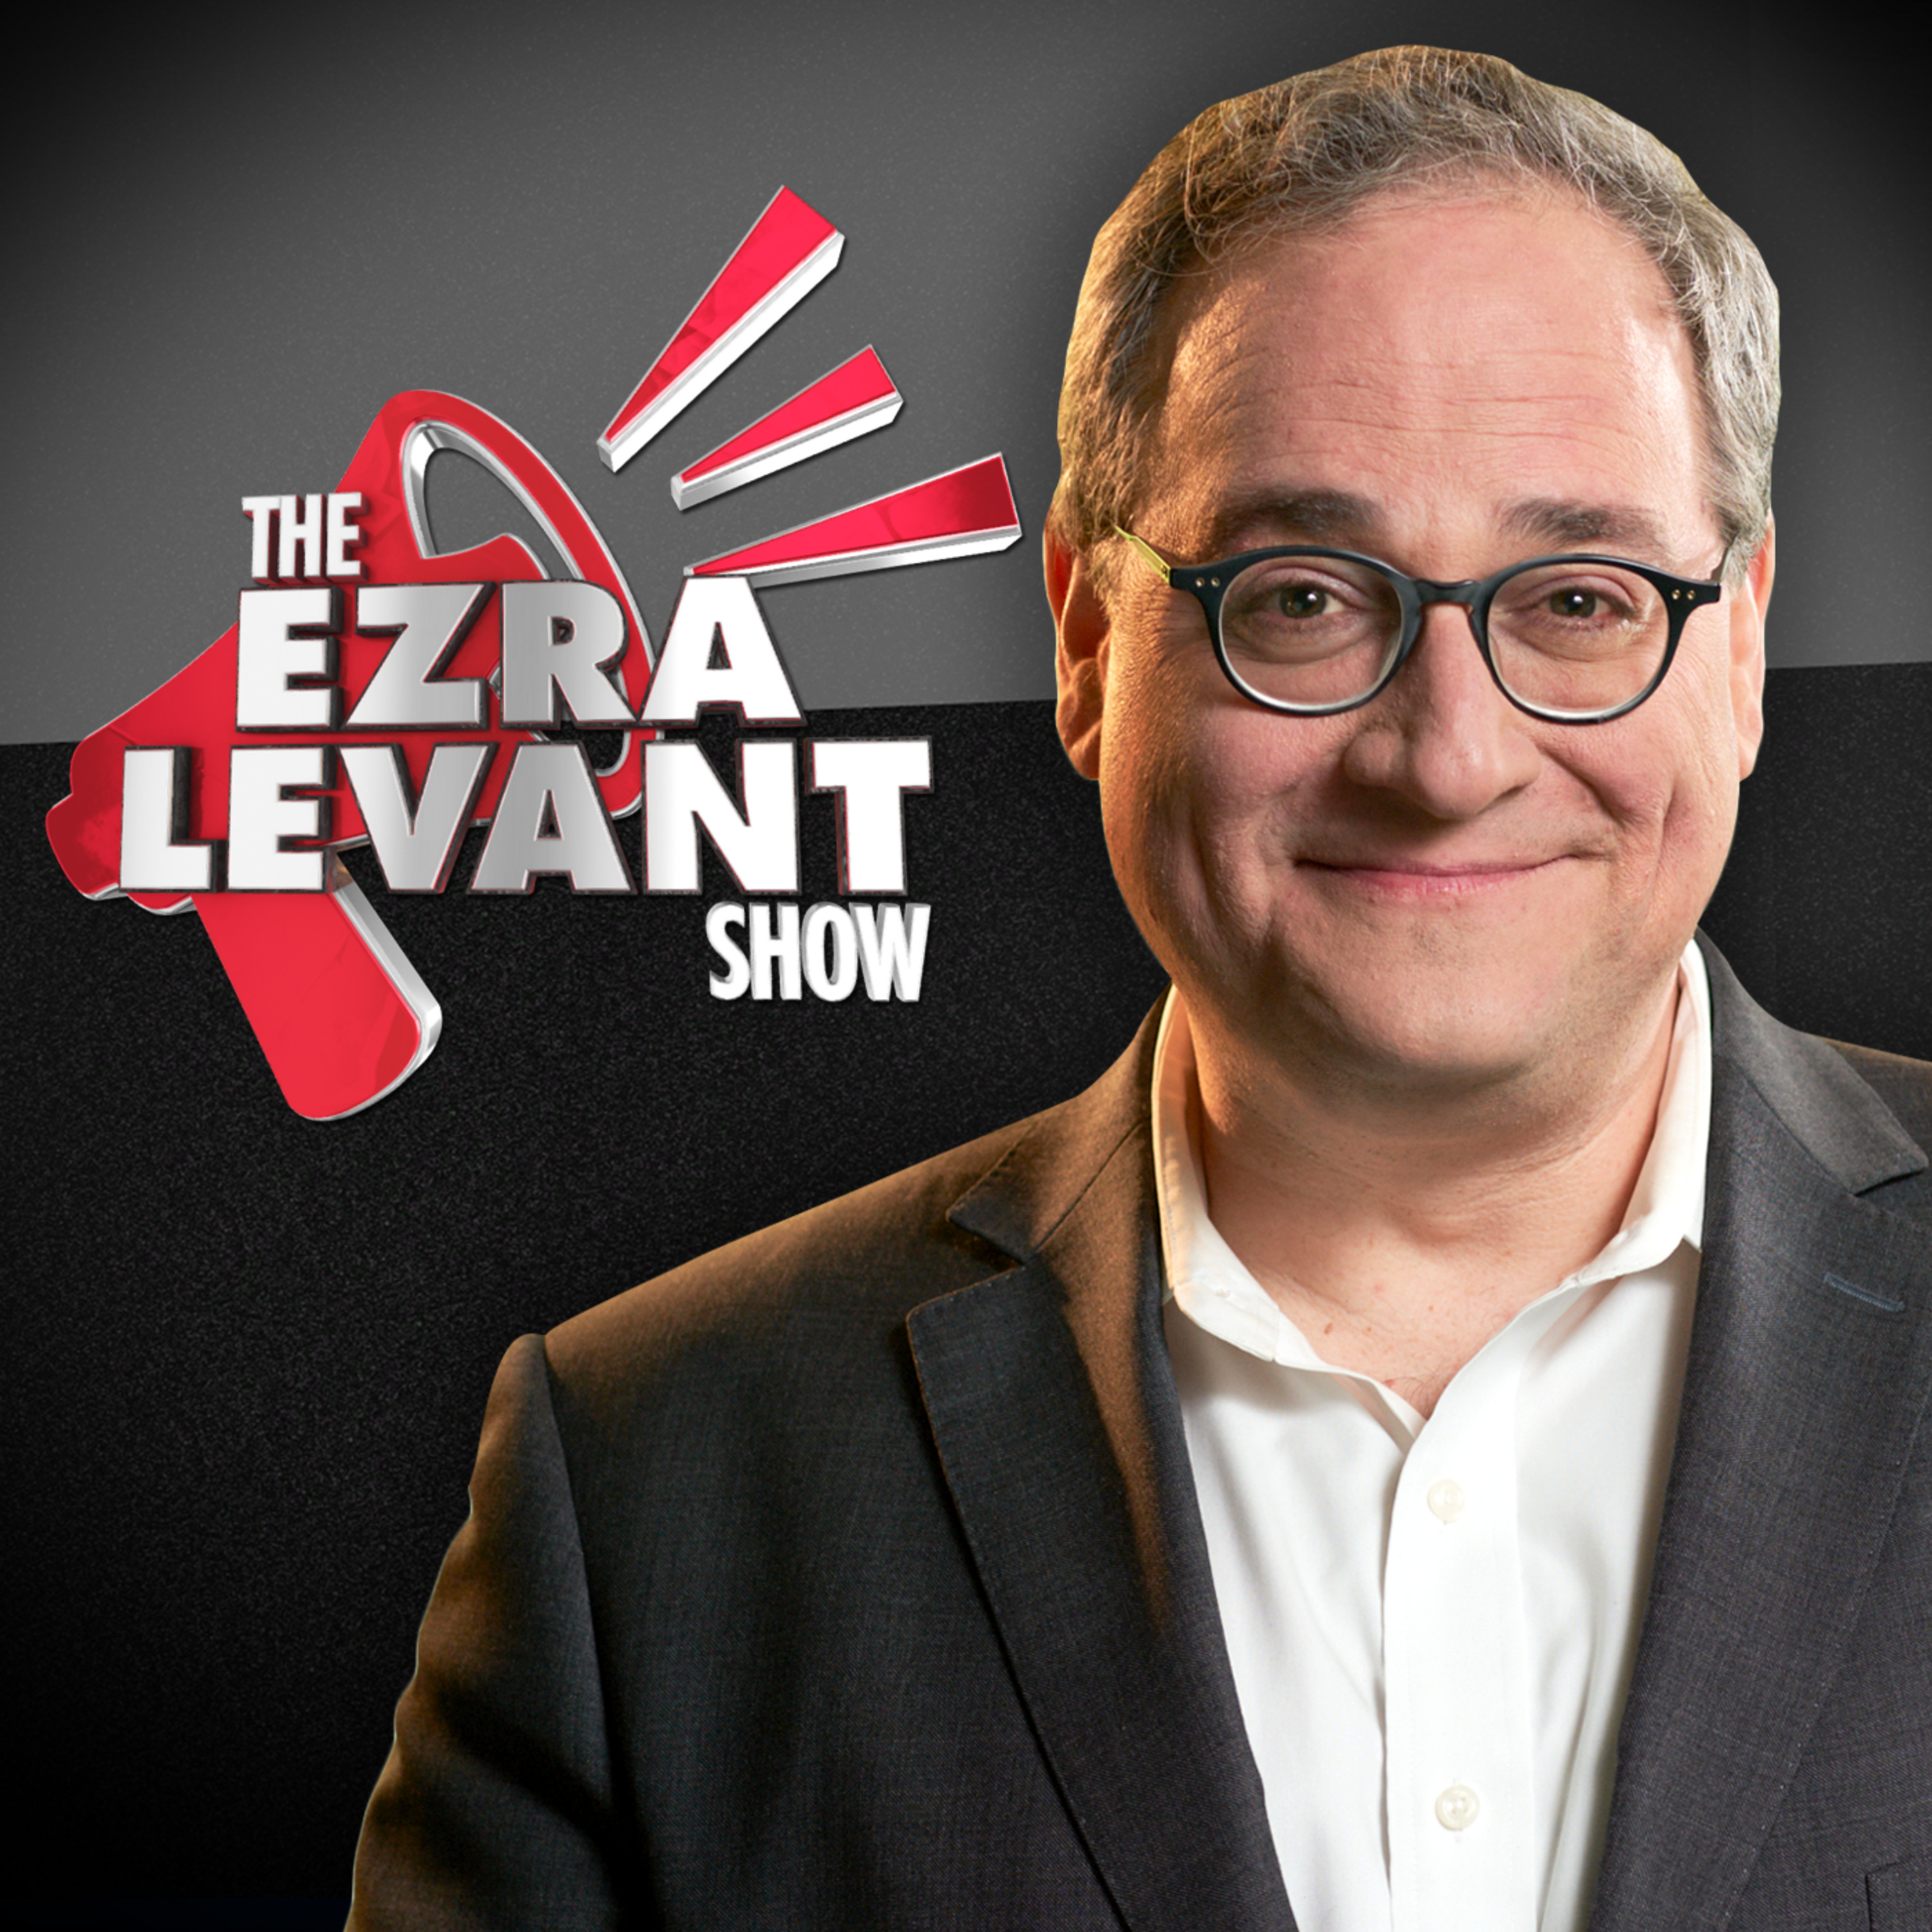 EZRA LEVANT | Part cowboy, part rock-and-roll singer, part lawyer: an interview with Chad Williamson